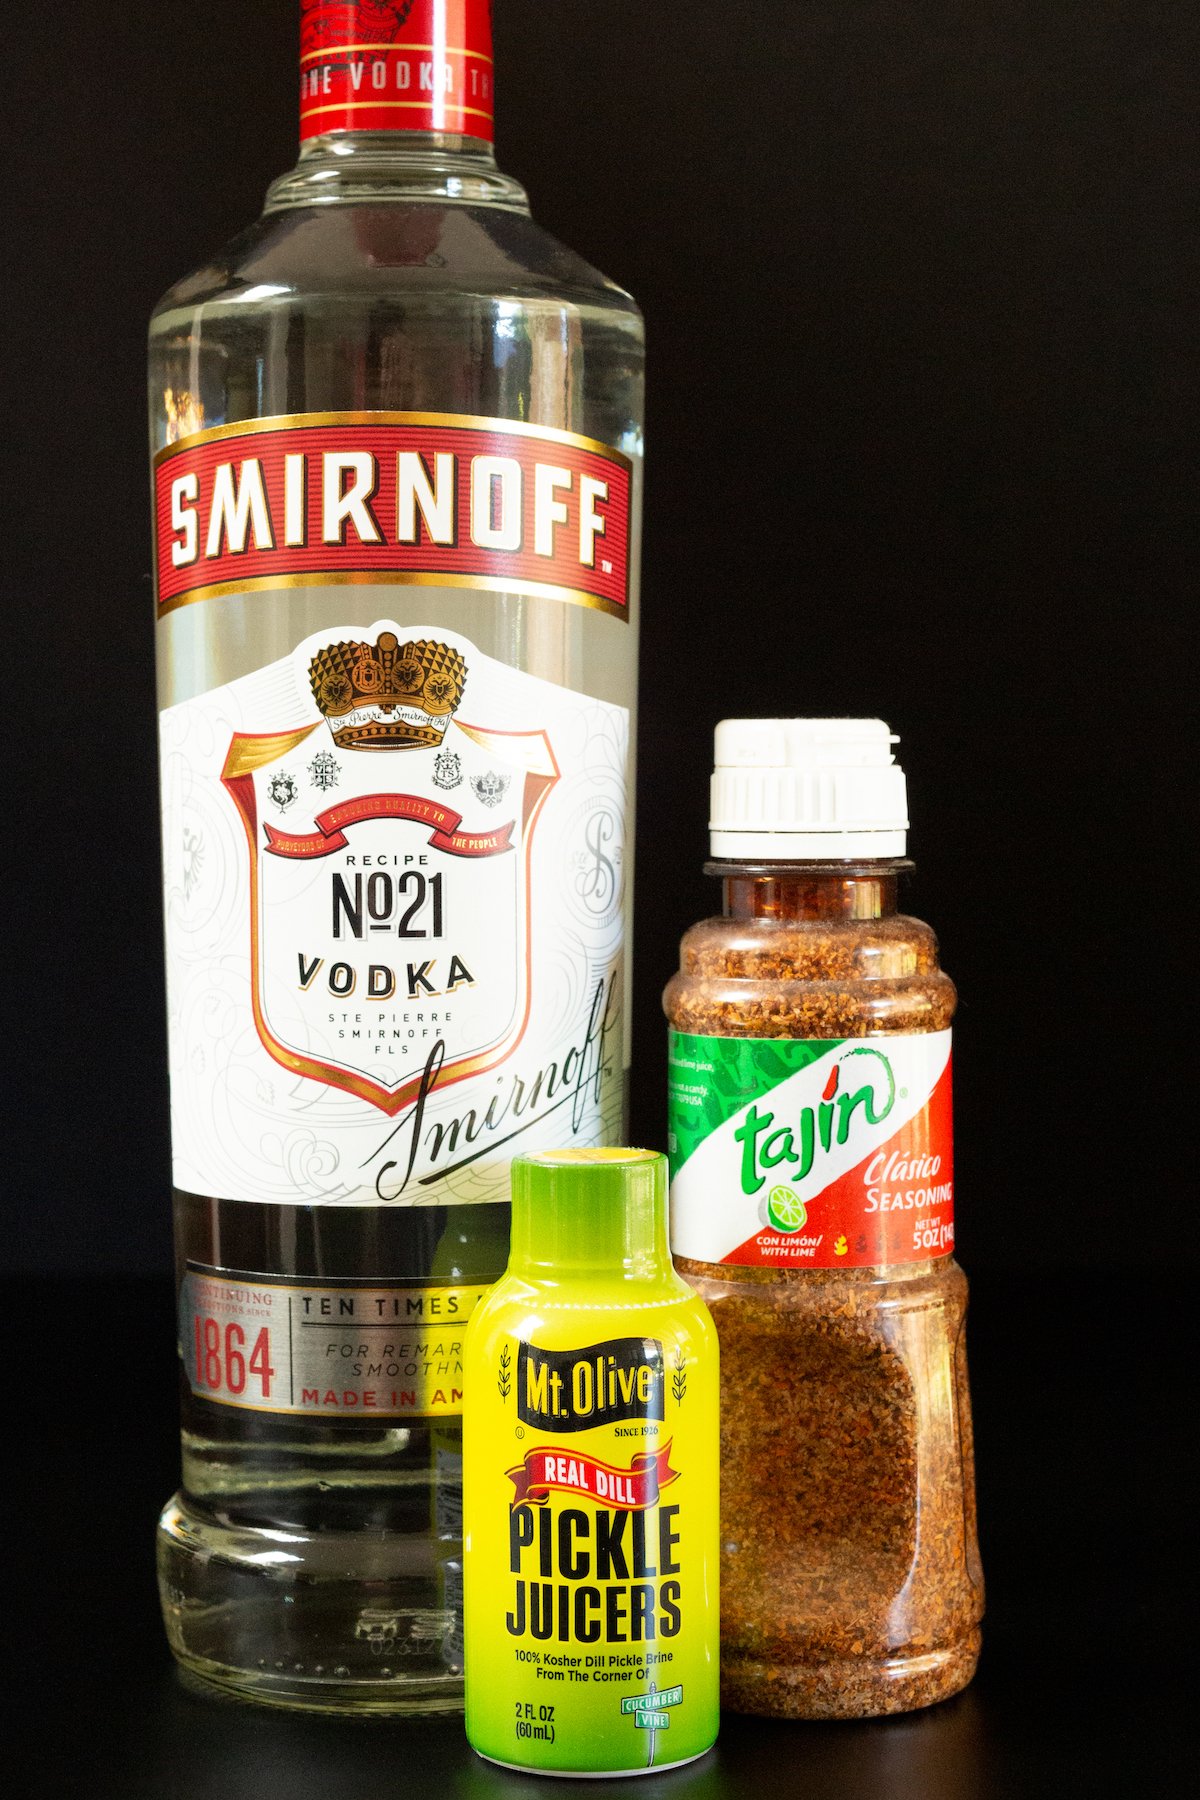 All the ingredients to make pickle shots on a black background - a bottle of vodka, Tajin, and pickle juice.